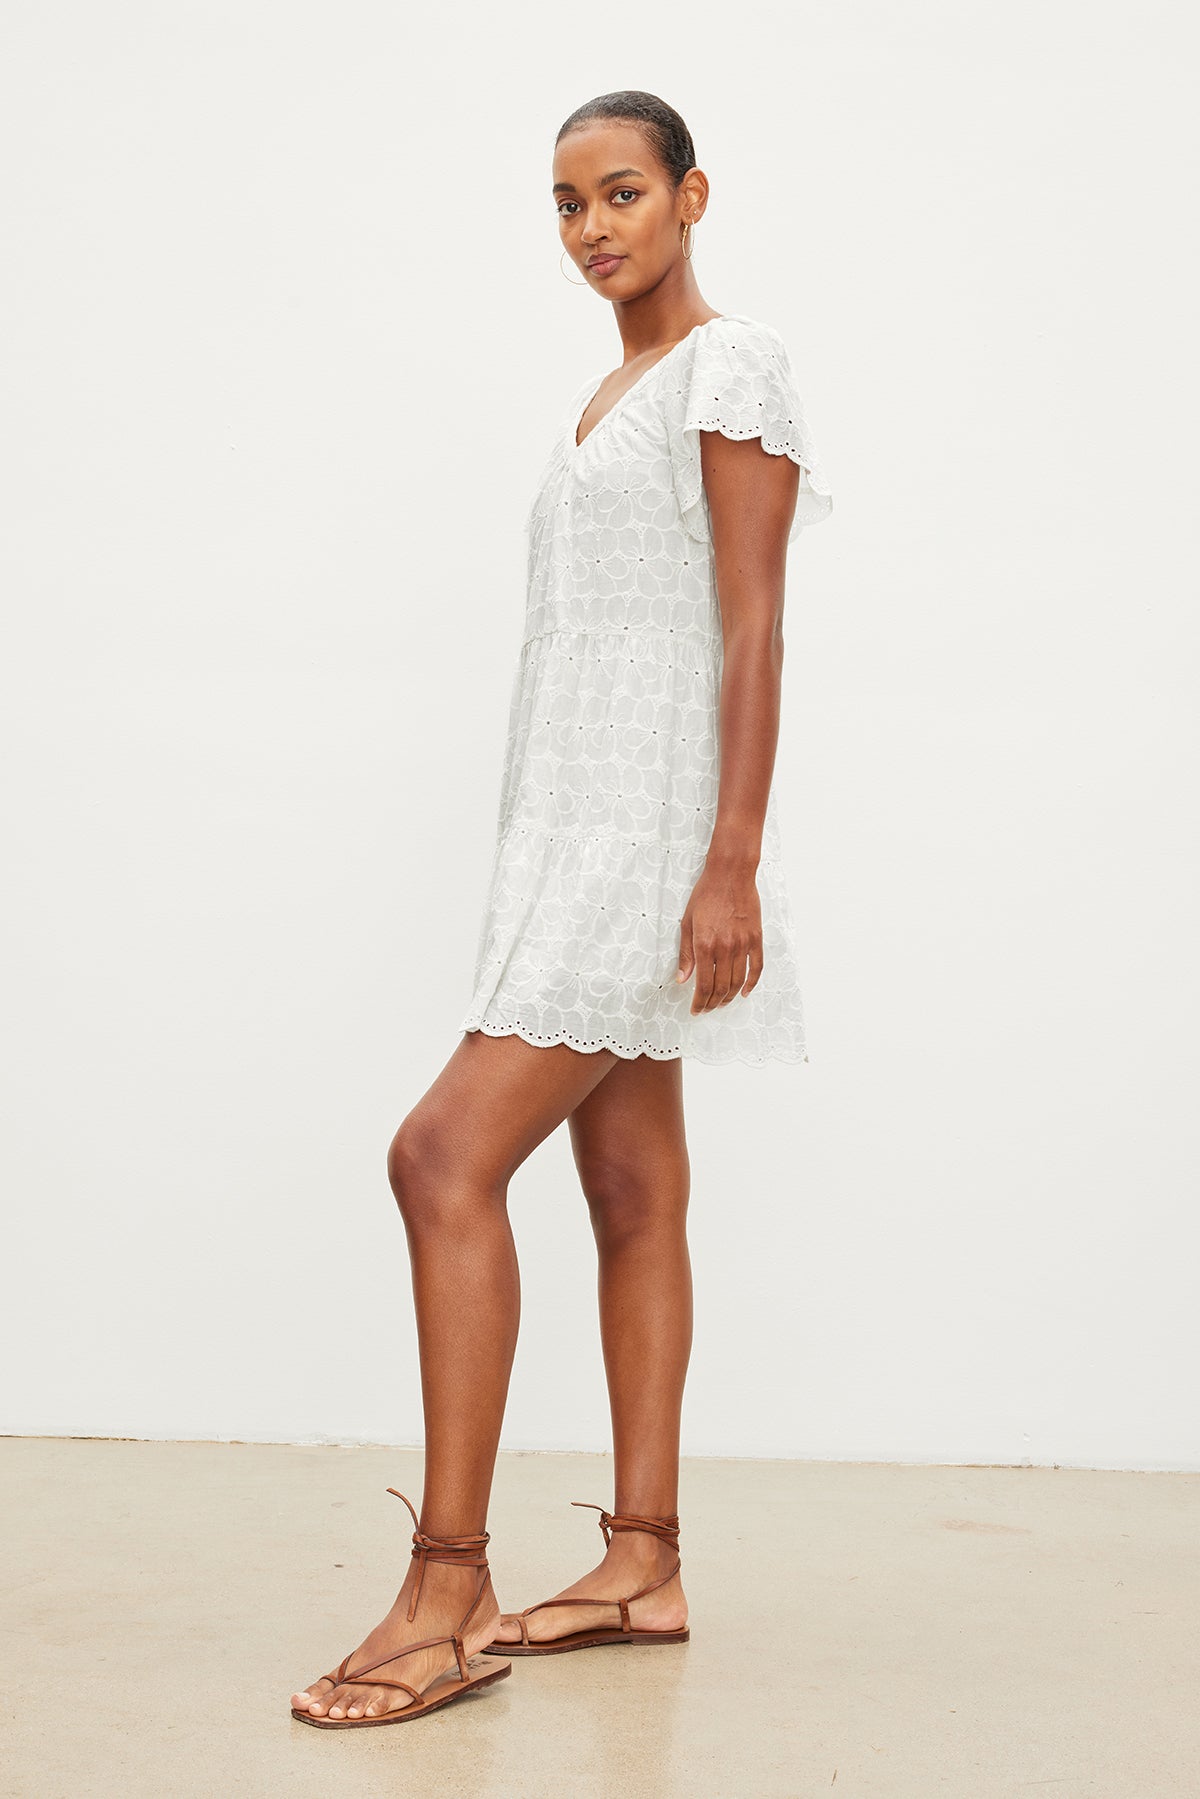   The model is wearing a WYNETTE EMBROIDERED COTTON DRESS by Velvet by Graham & Spencer and sandals. 